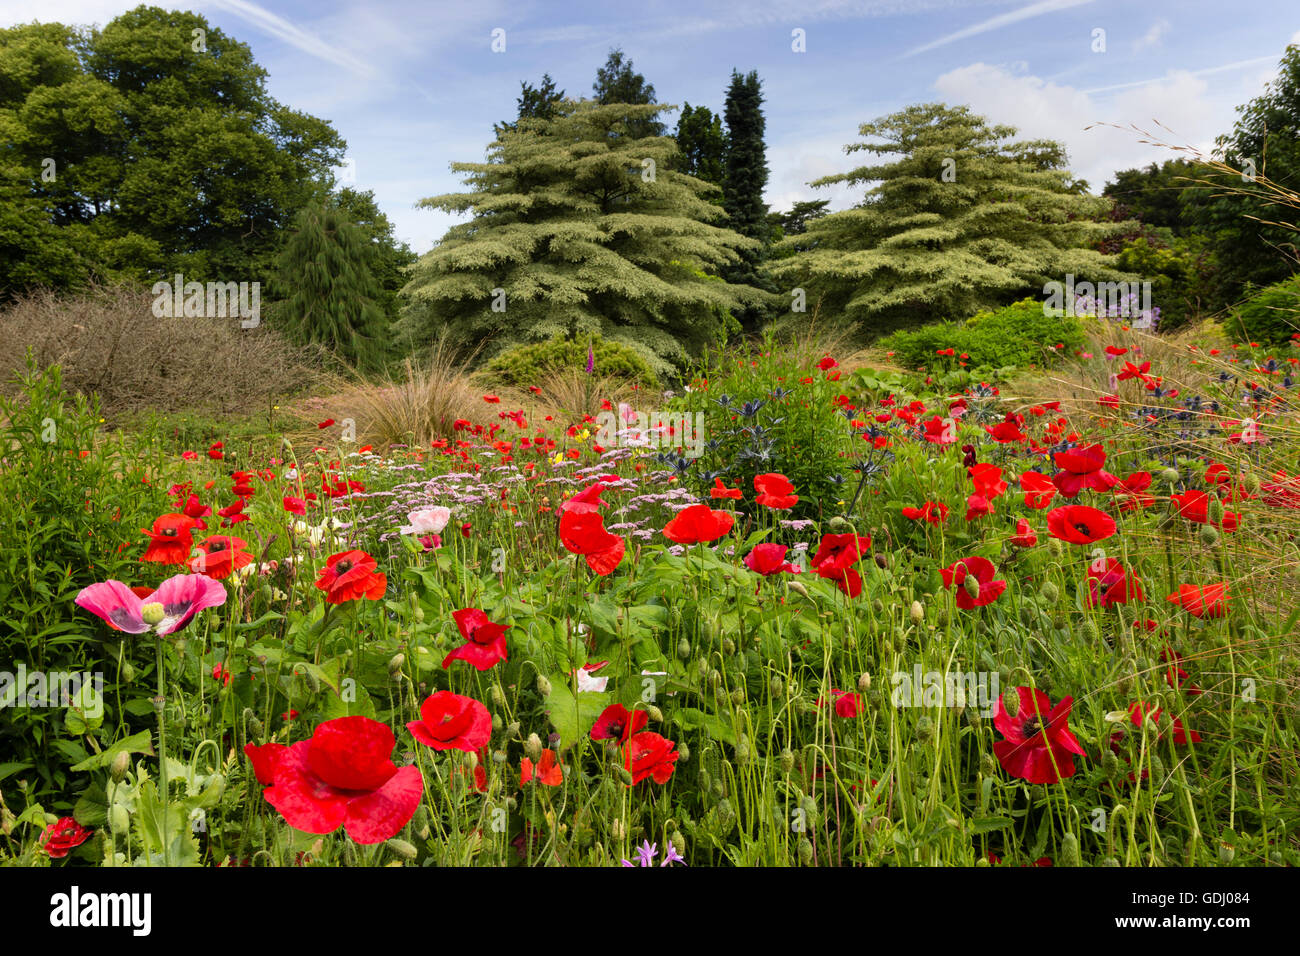 Shirley poppies dominate the view across the naturalistic planting of the Summer Garden at the Garden House, Devon, UK Stock Photo